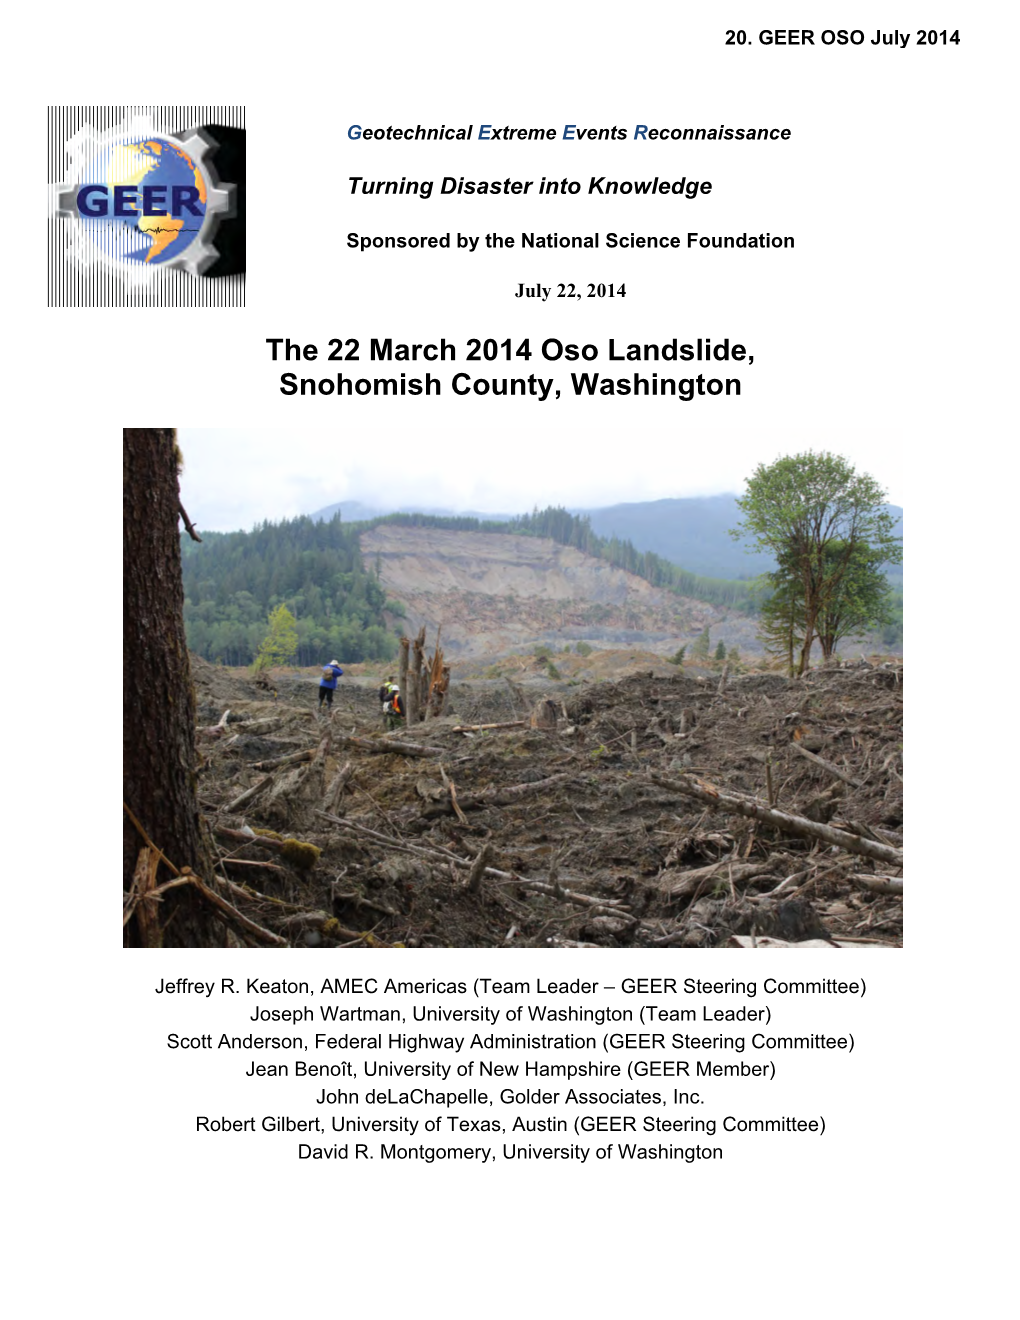 The 22 March 2014 Oso Landslide, Snohomish County, Washington